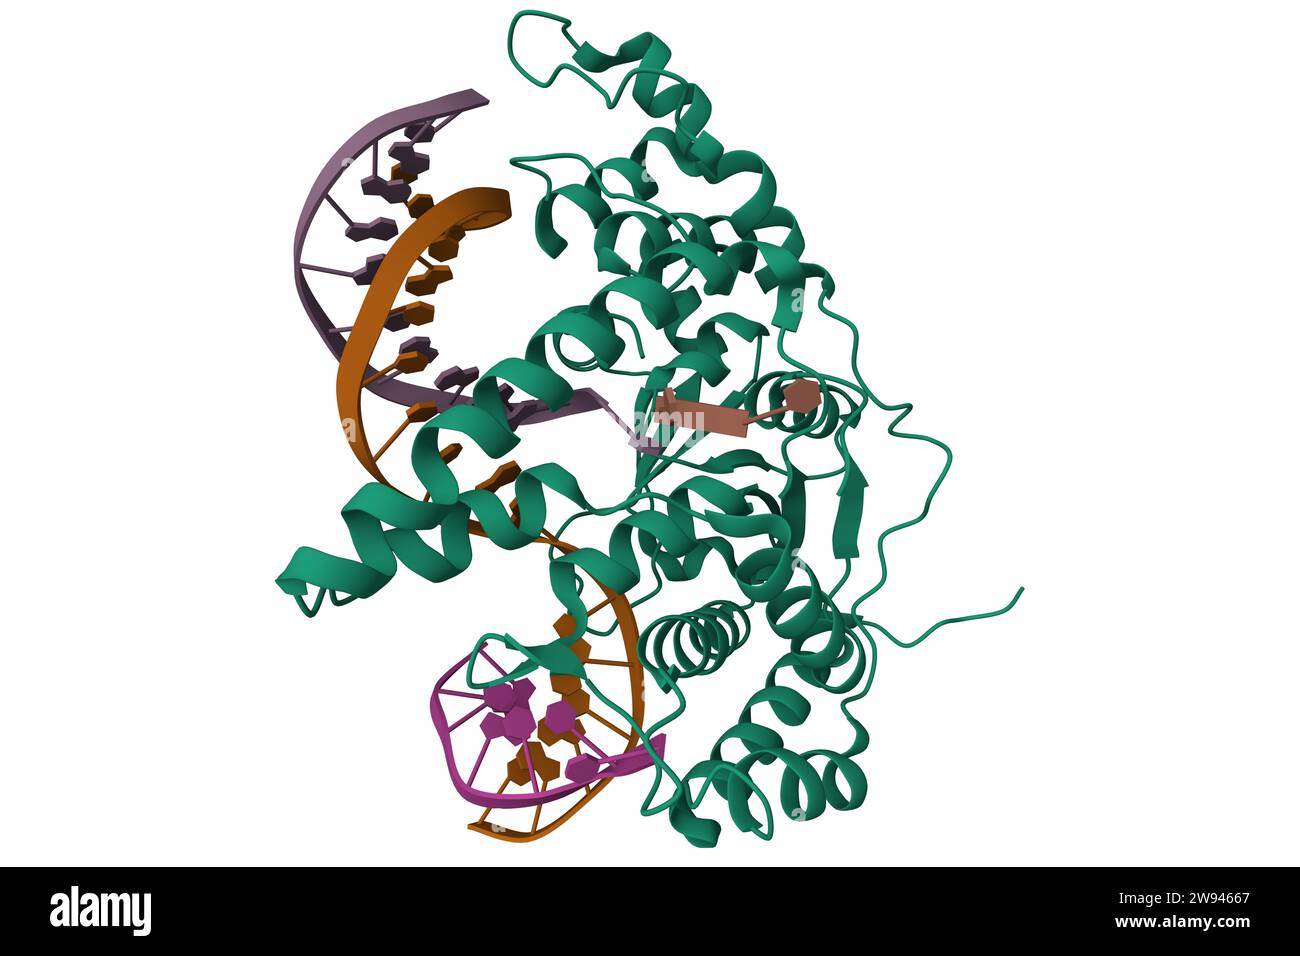 Flap endonuclease 1 (FEN1) D233N with cleaved product fragment. 3D cartoon model, PDB 5k97, white background Stock Photo